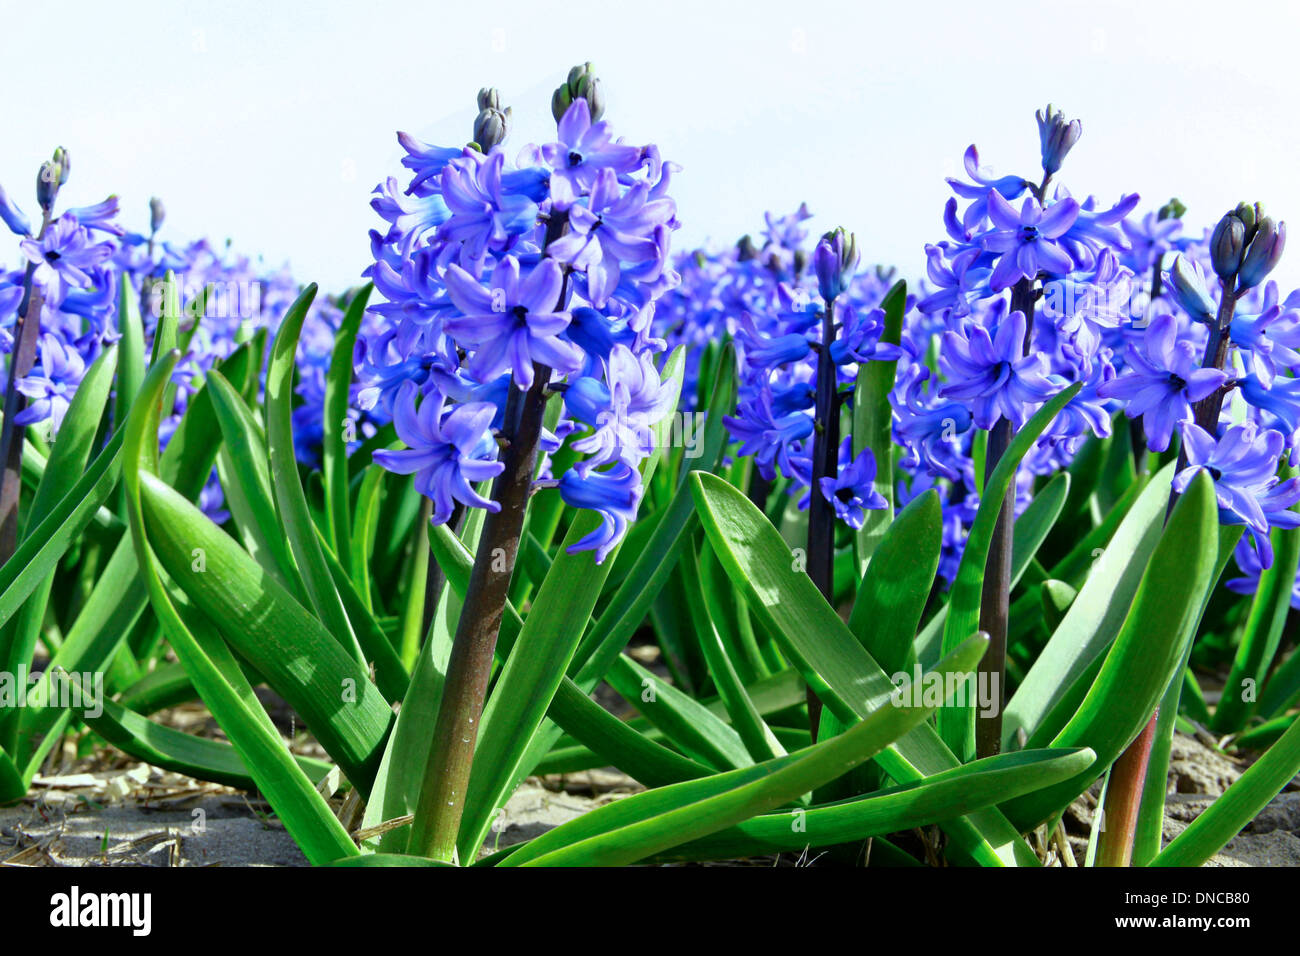 Spring time: Colorful blue hyacinths, blooming at full peak, Noordwijkerhout, South Holland, The Netherlands. Stock Photo